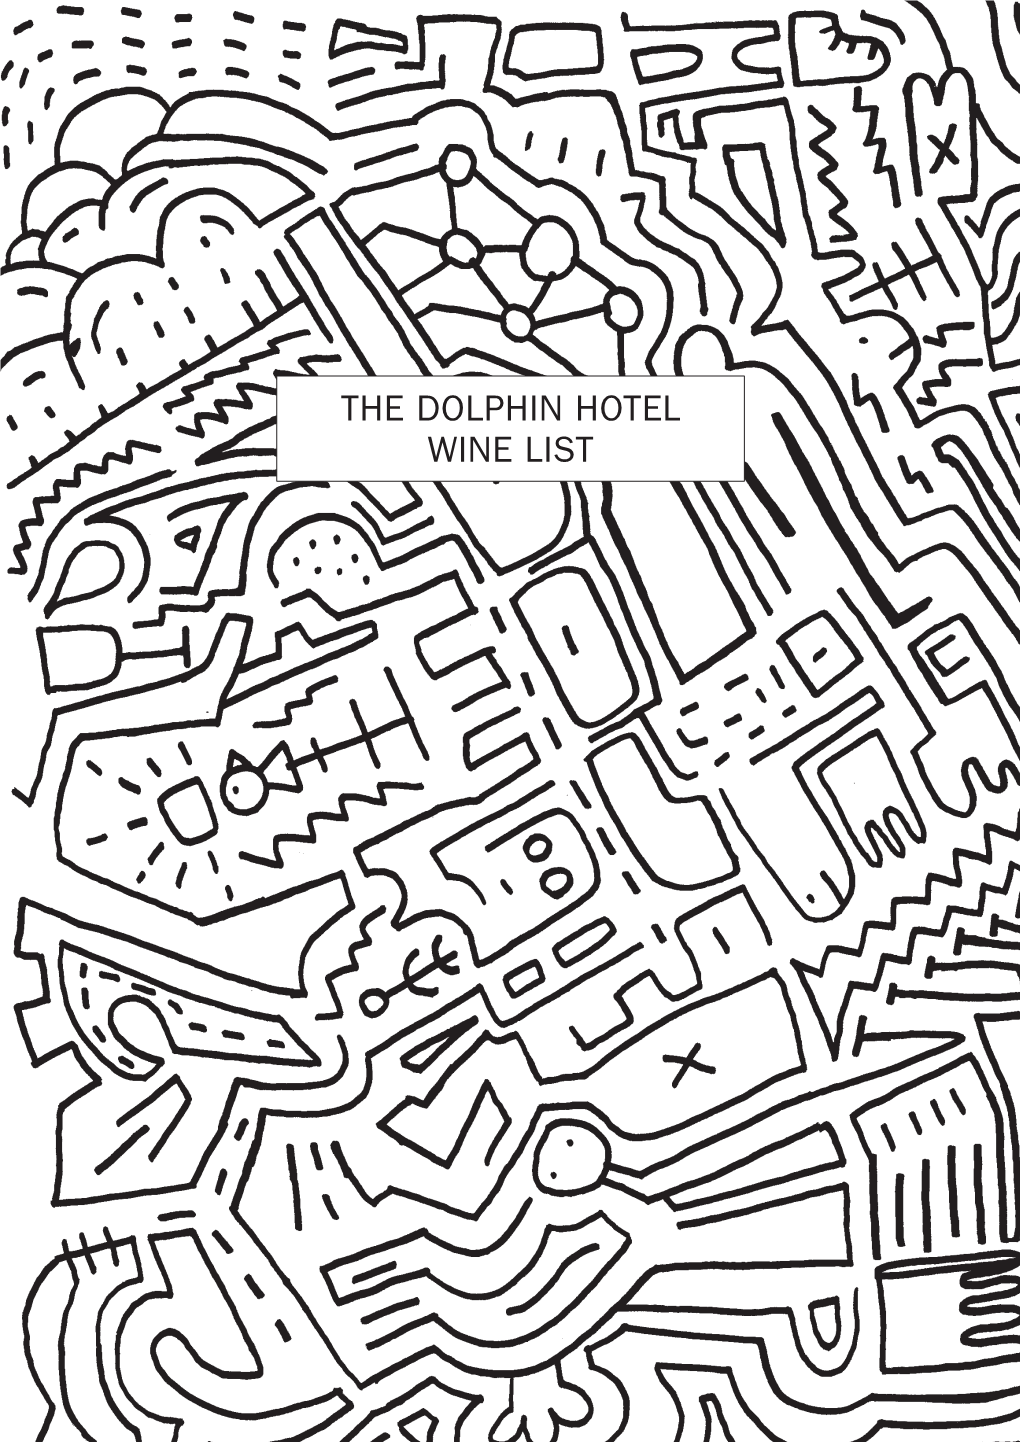 The Dolphin Hotel Wine List 5°C Sparkling